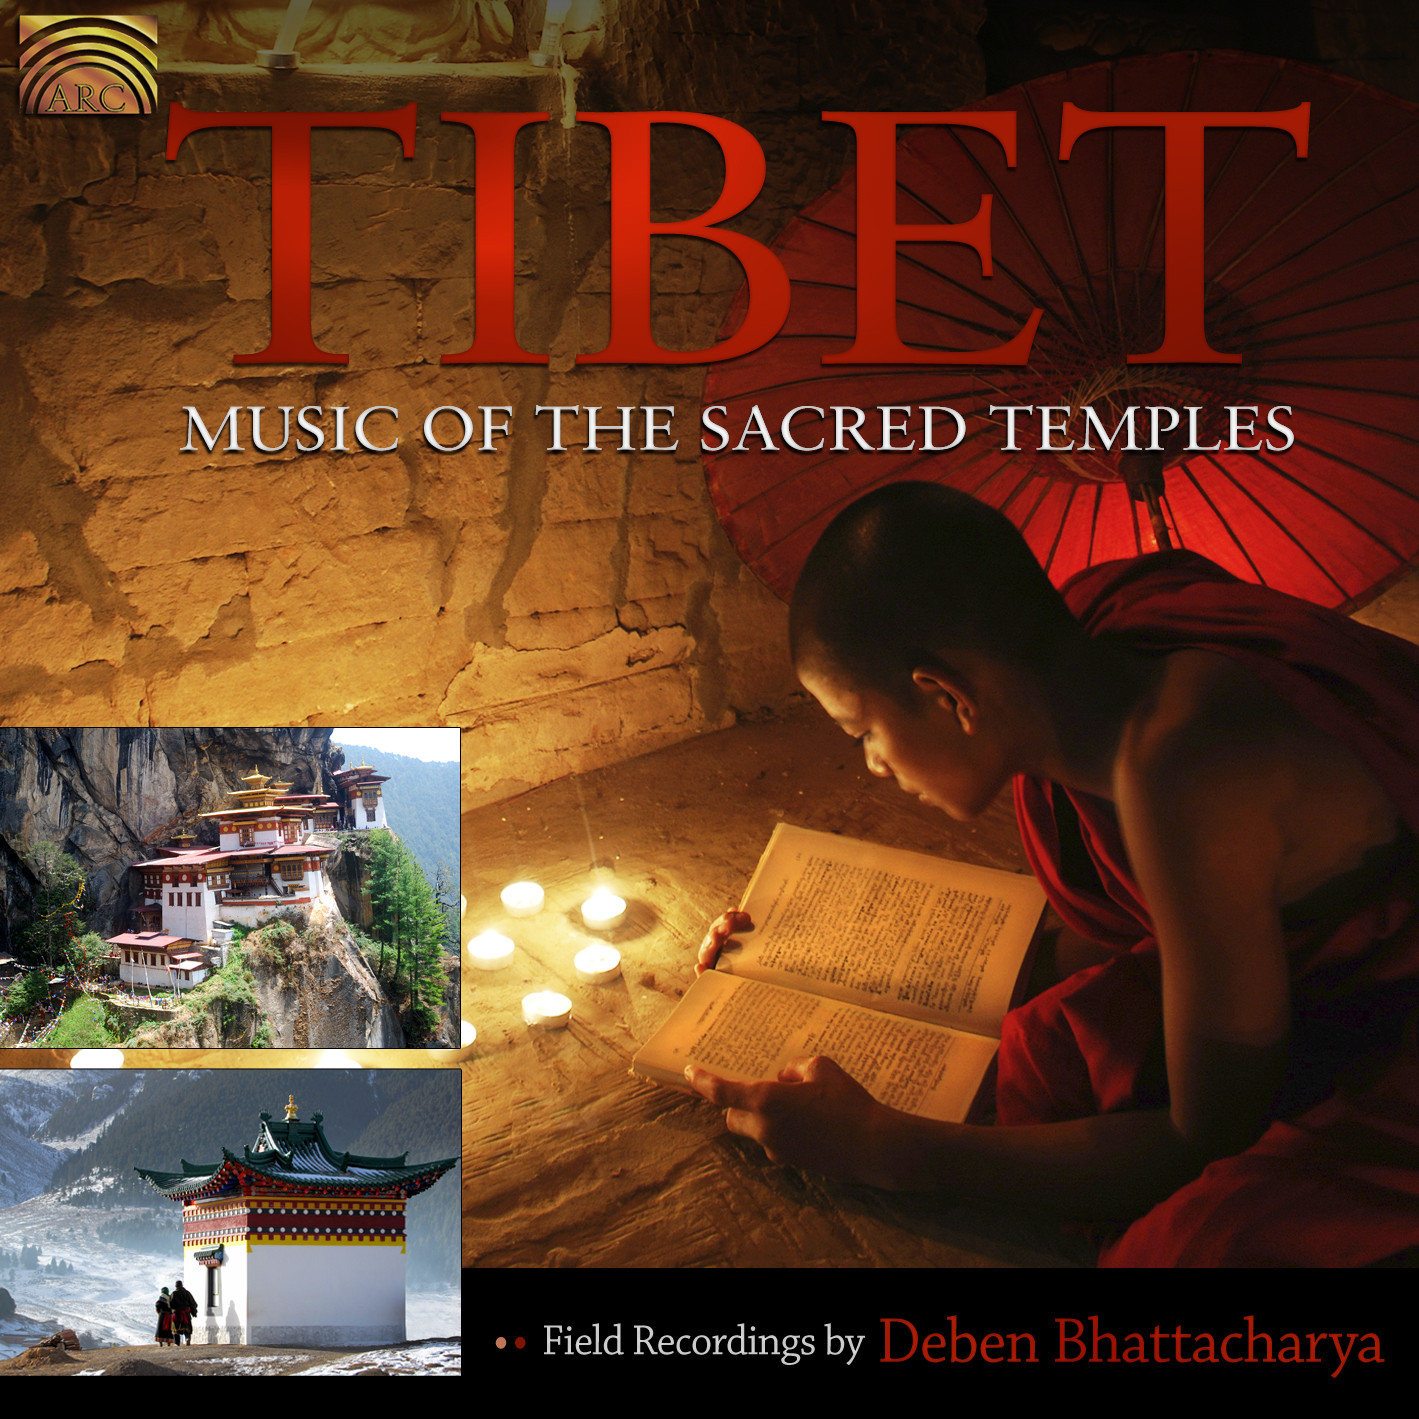 EUCD2325 Tibet - Music of the Sacred Temples - Field Recordings by Deben Bhattacharya